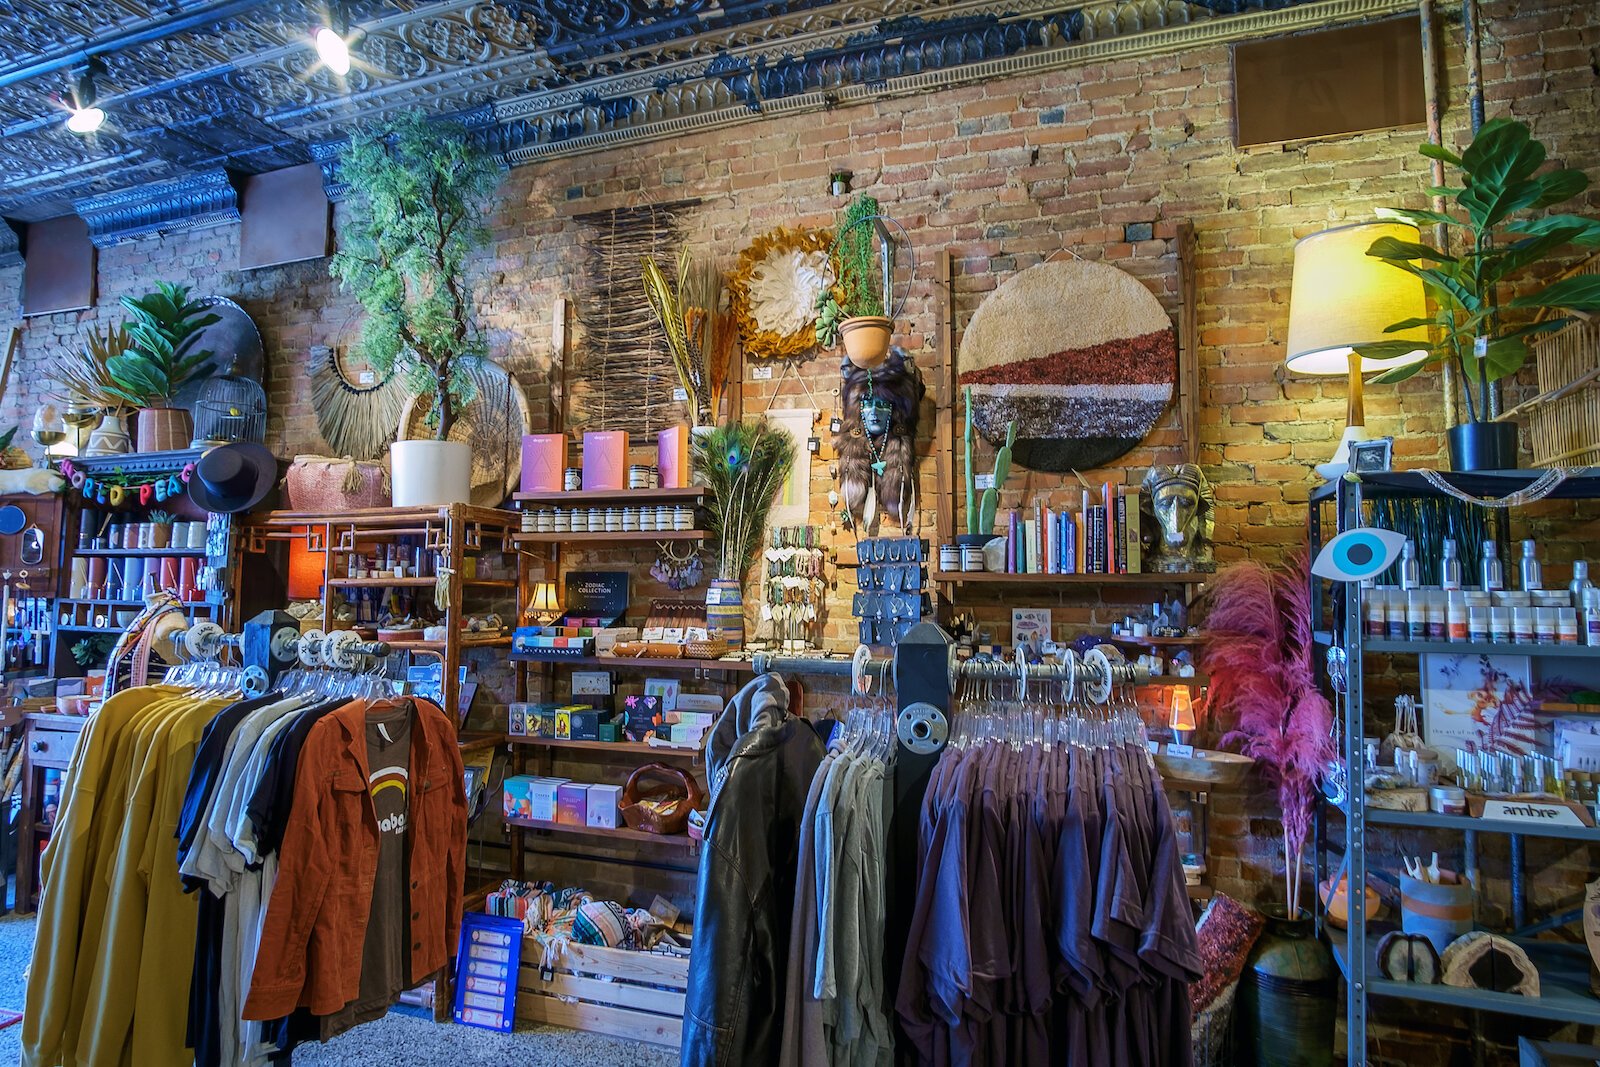 Bellazo and the Good Vibes Gift Shop 35 W. Market St. in Downtown Wabash.